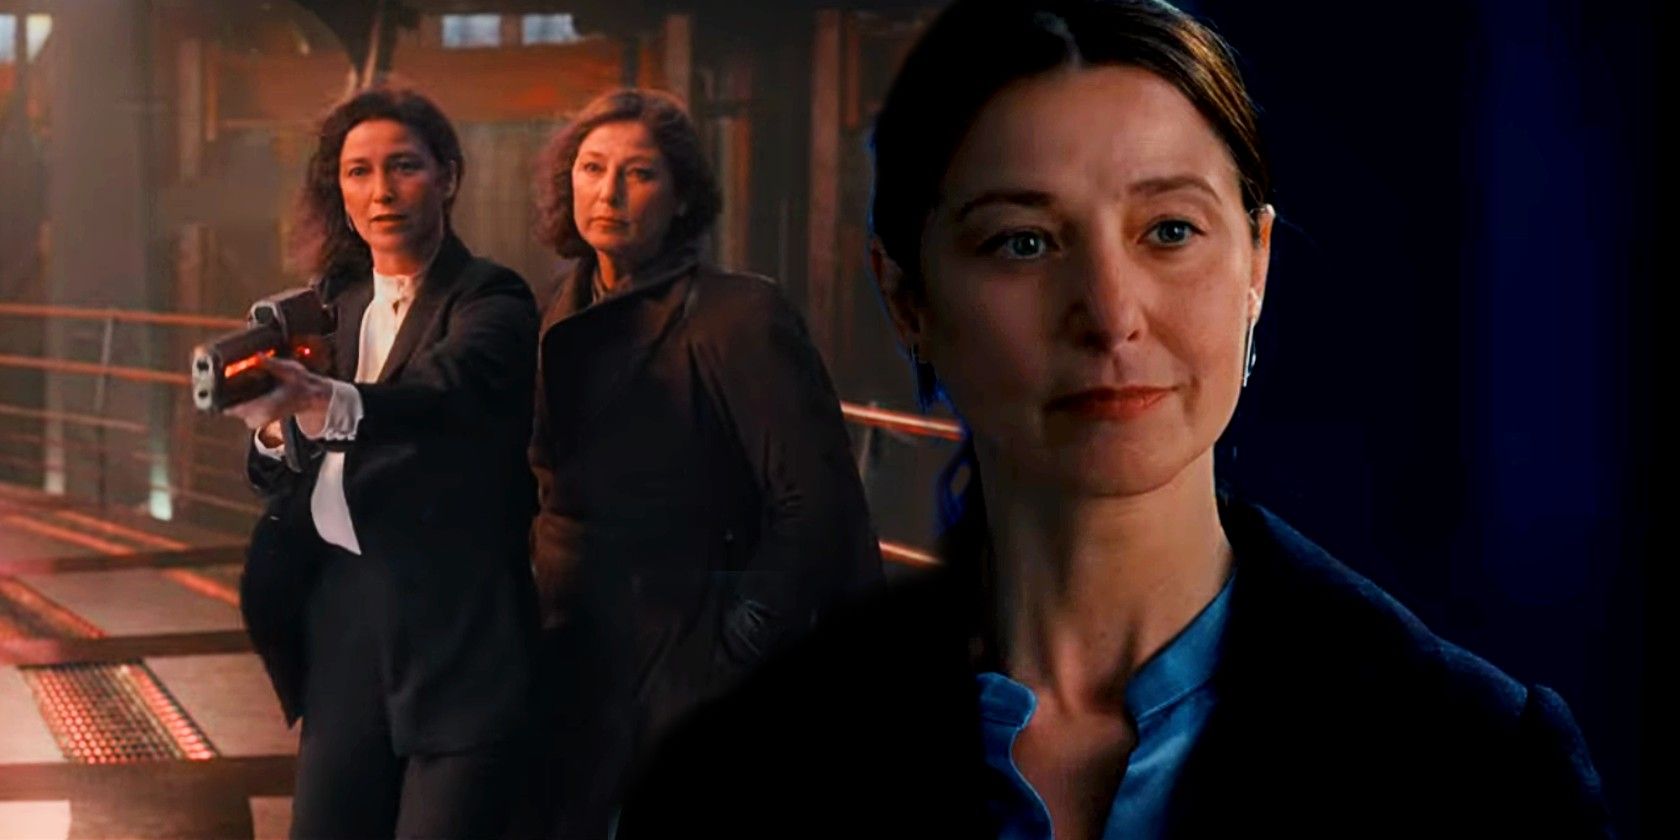 Catherine Keener as Maya Sorian in The Adam Project - her present-day self and a younger, deepfake version of her.